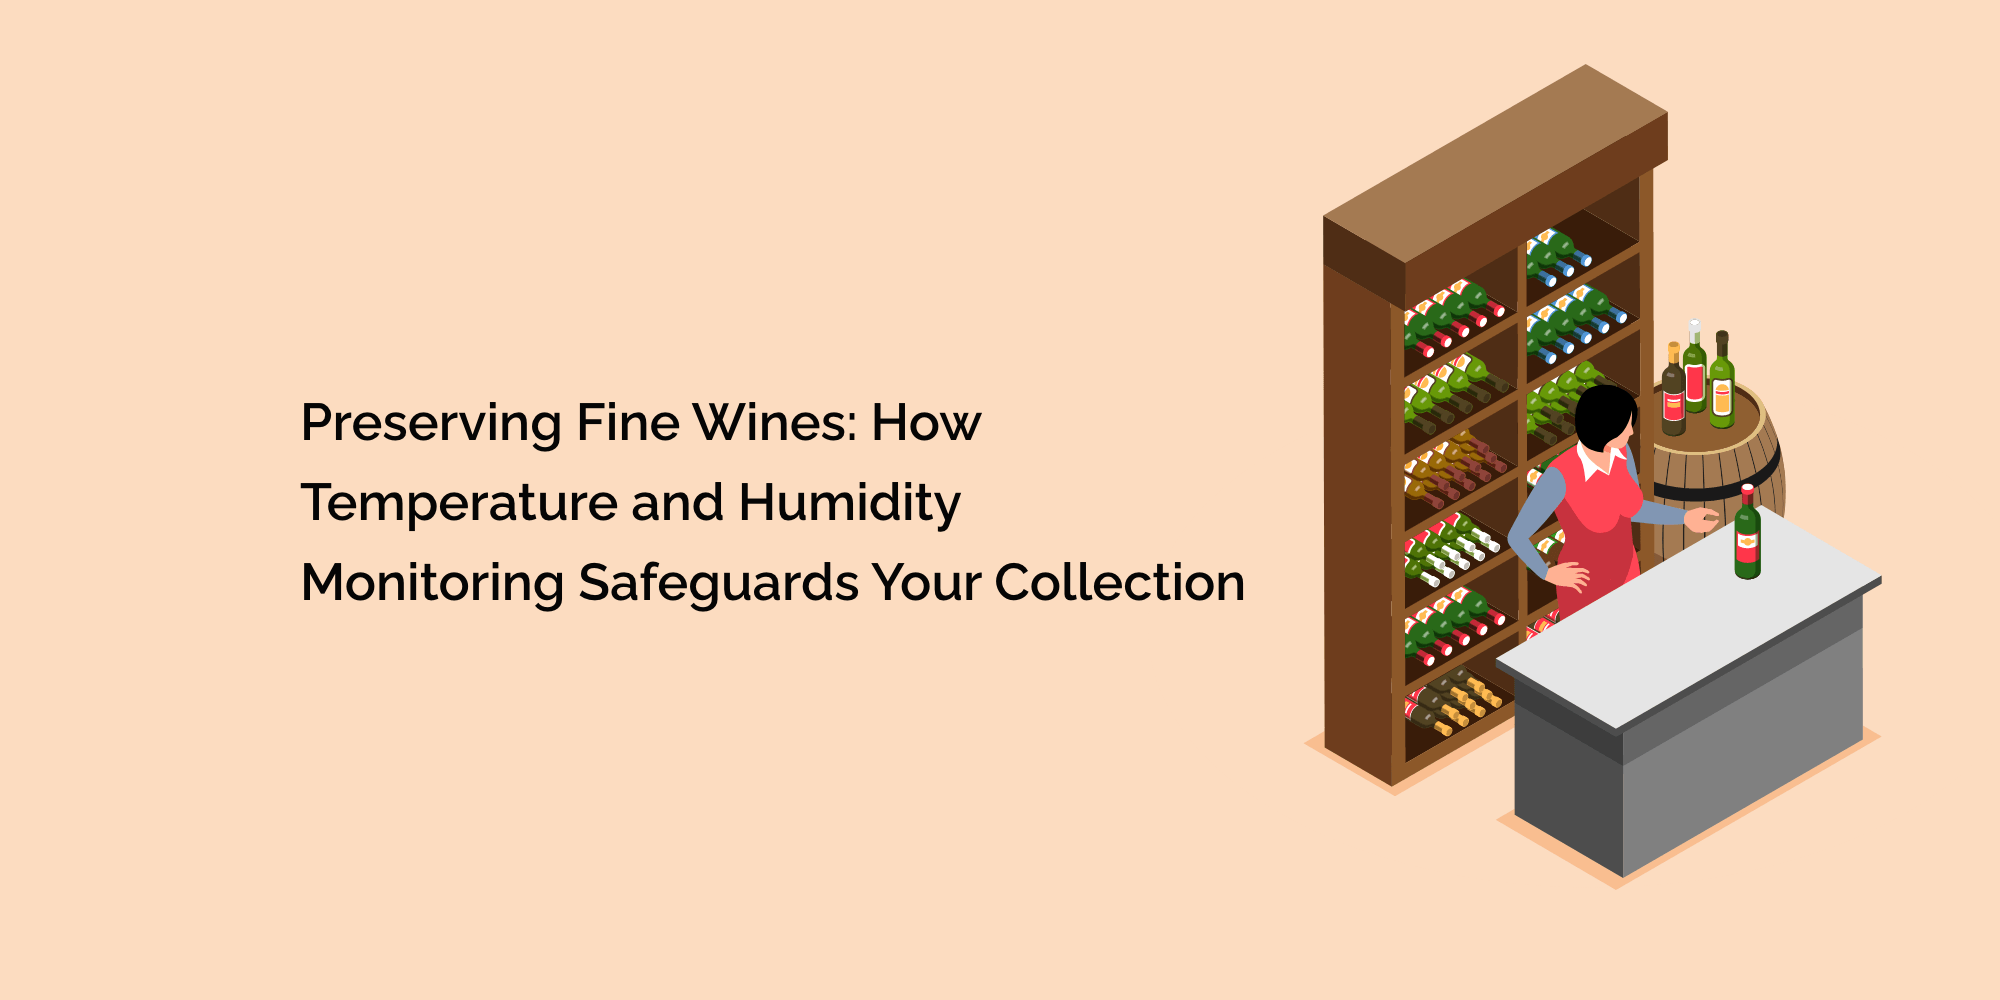 Preserving Fine Wines: How Temperature and Humidity Monitoring Safeguards Your Collection